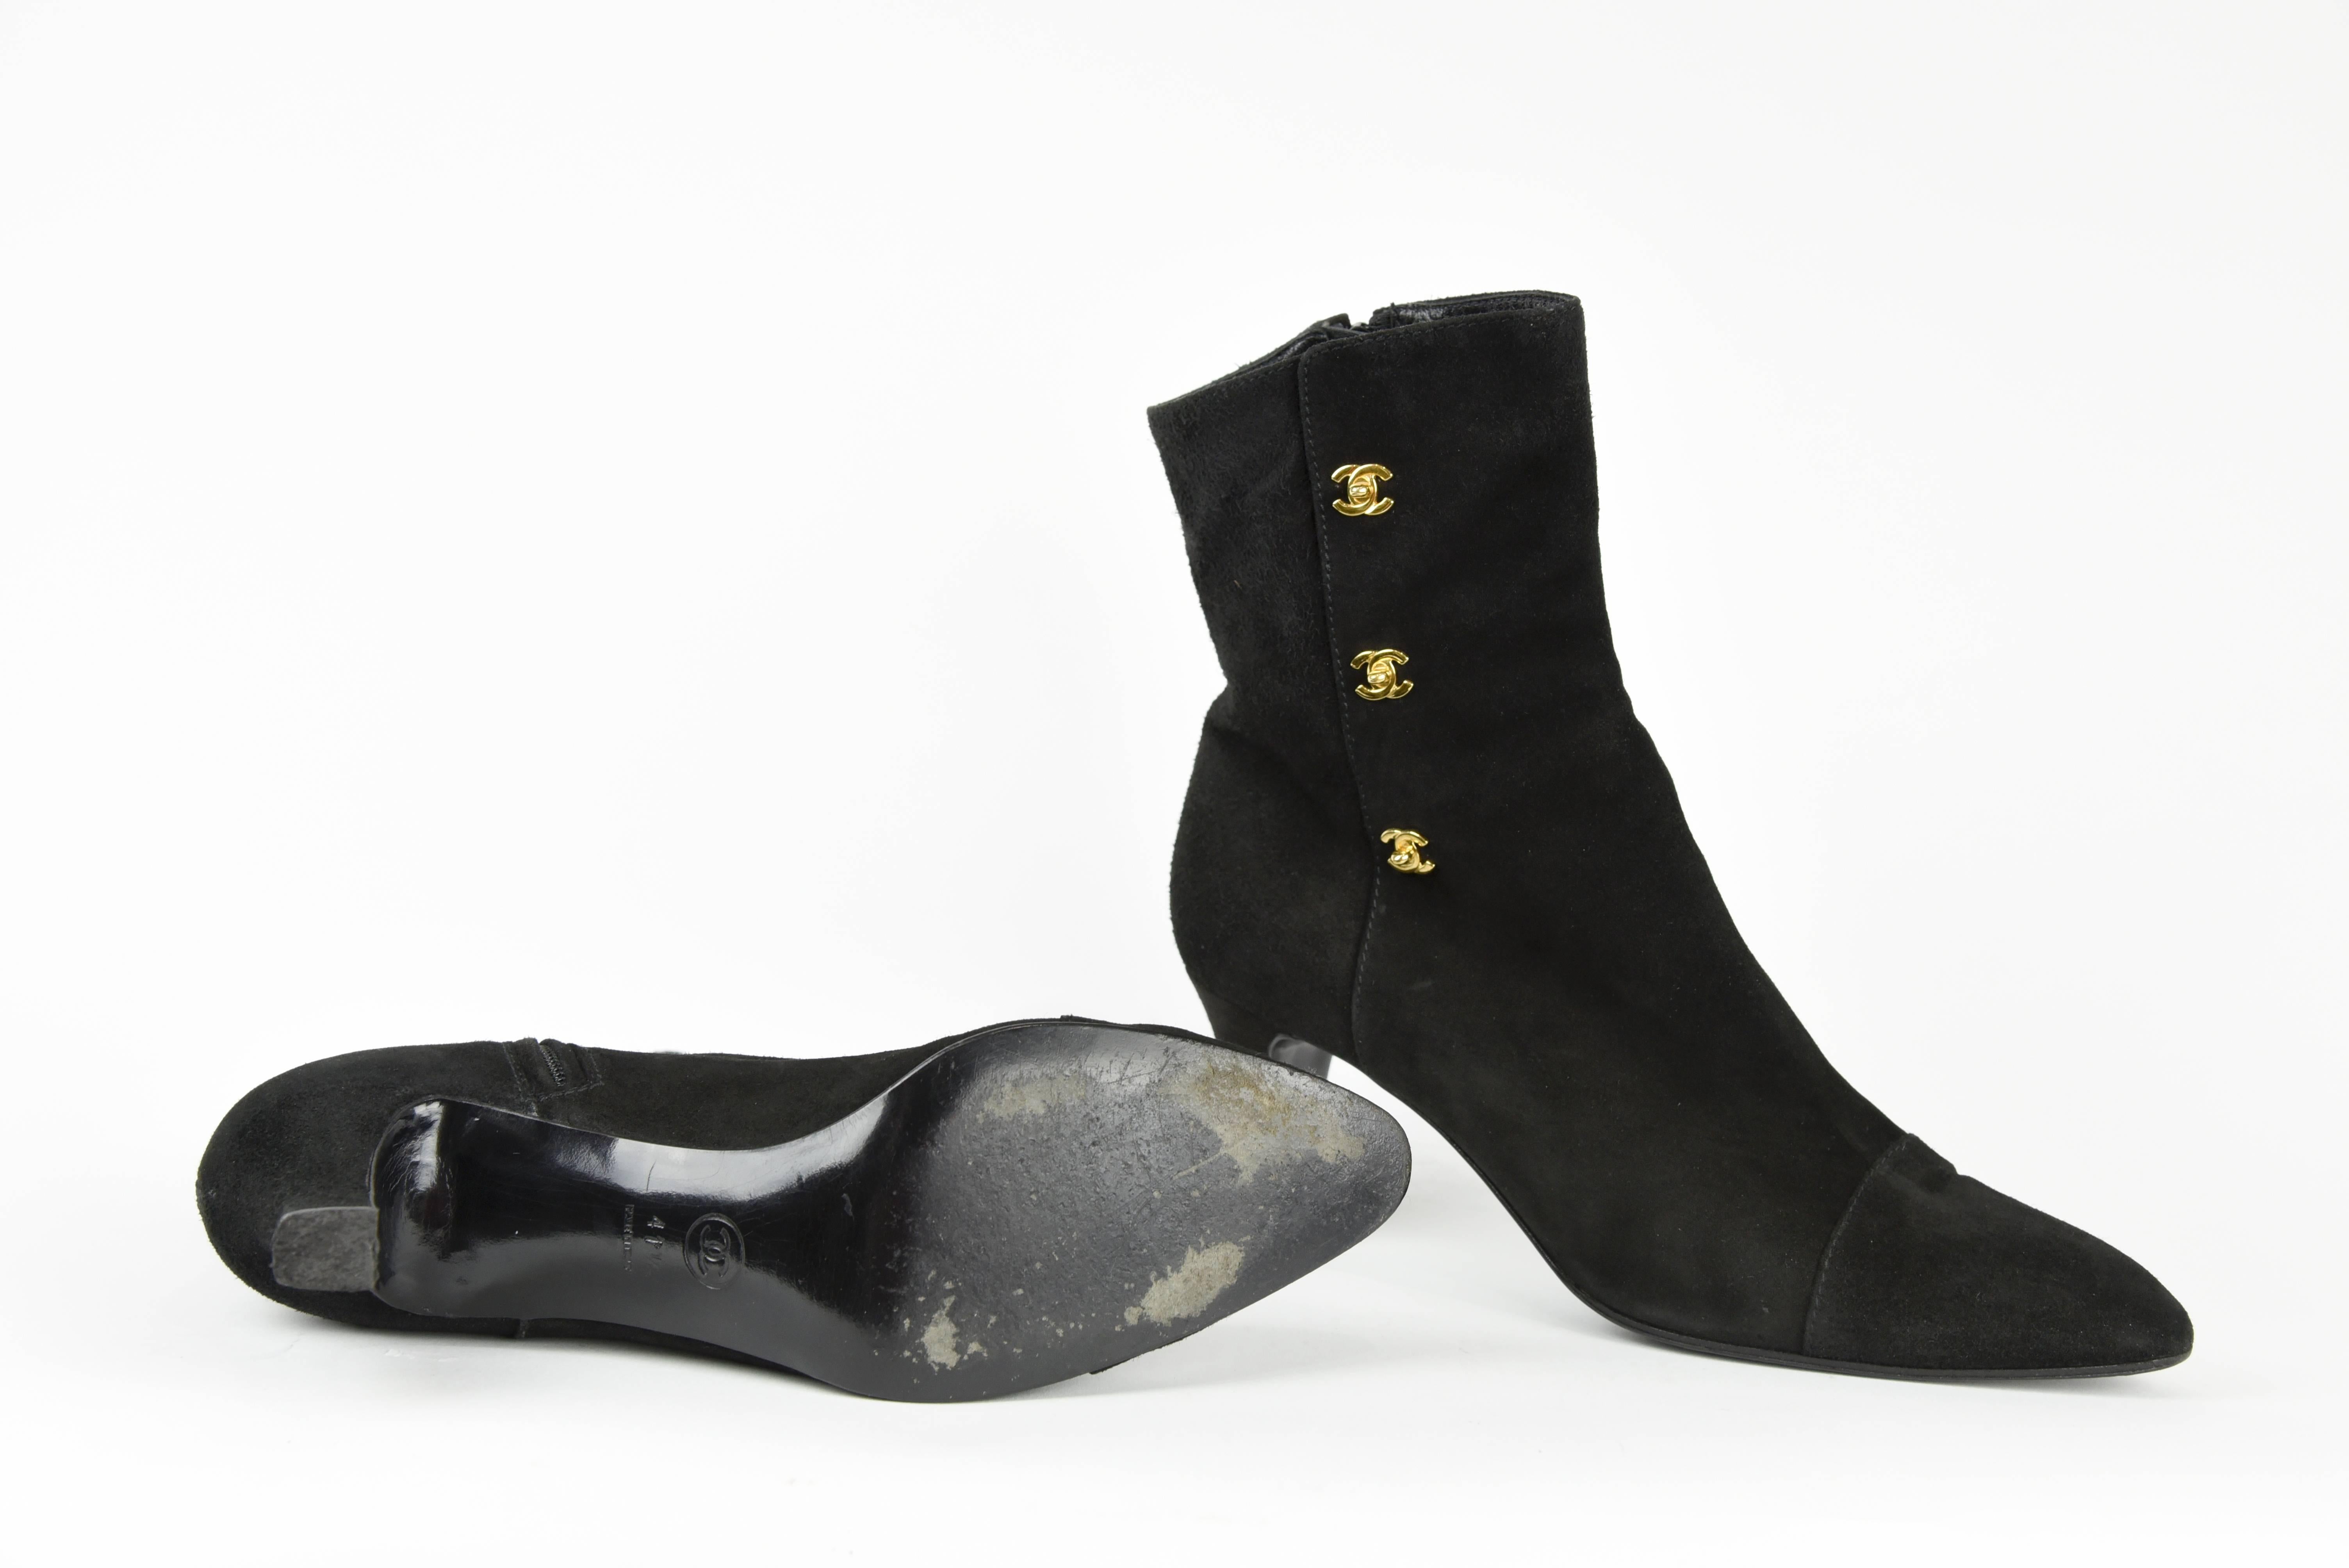 Chanel 1990s Black Suede Ankle Boots with 3 Gold 